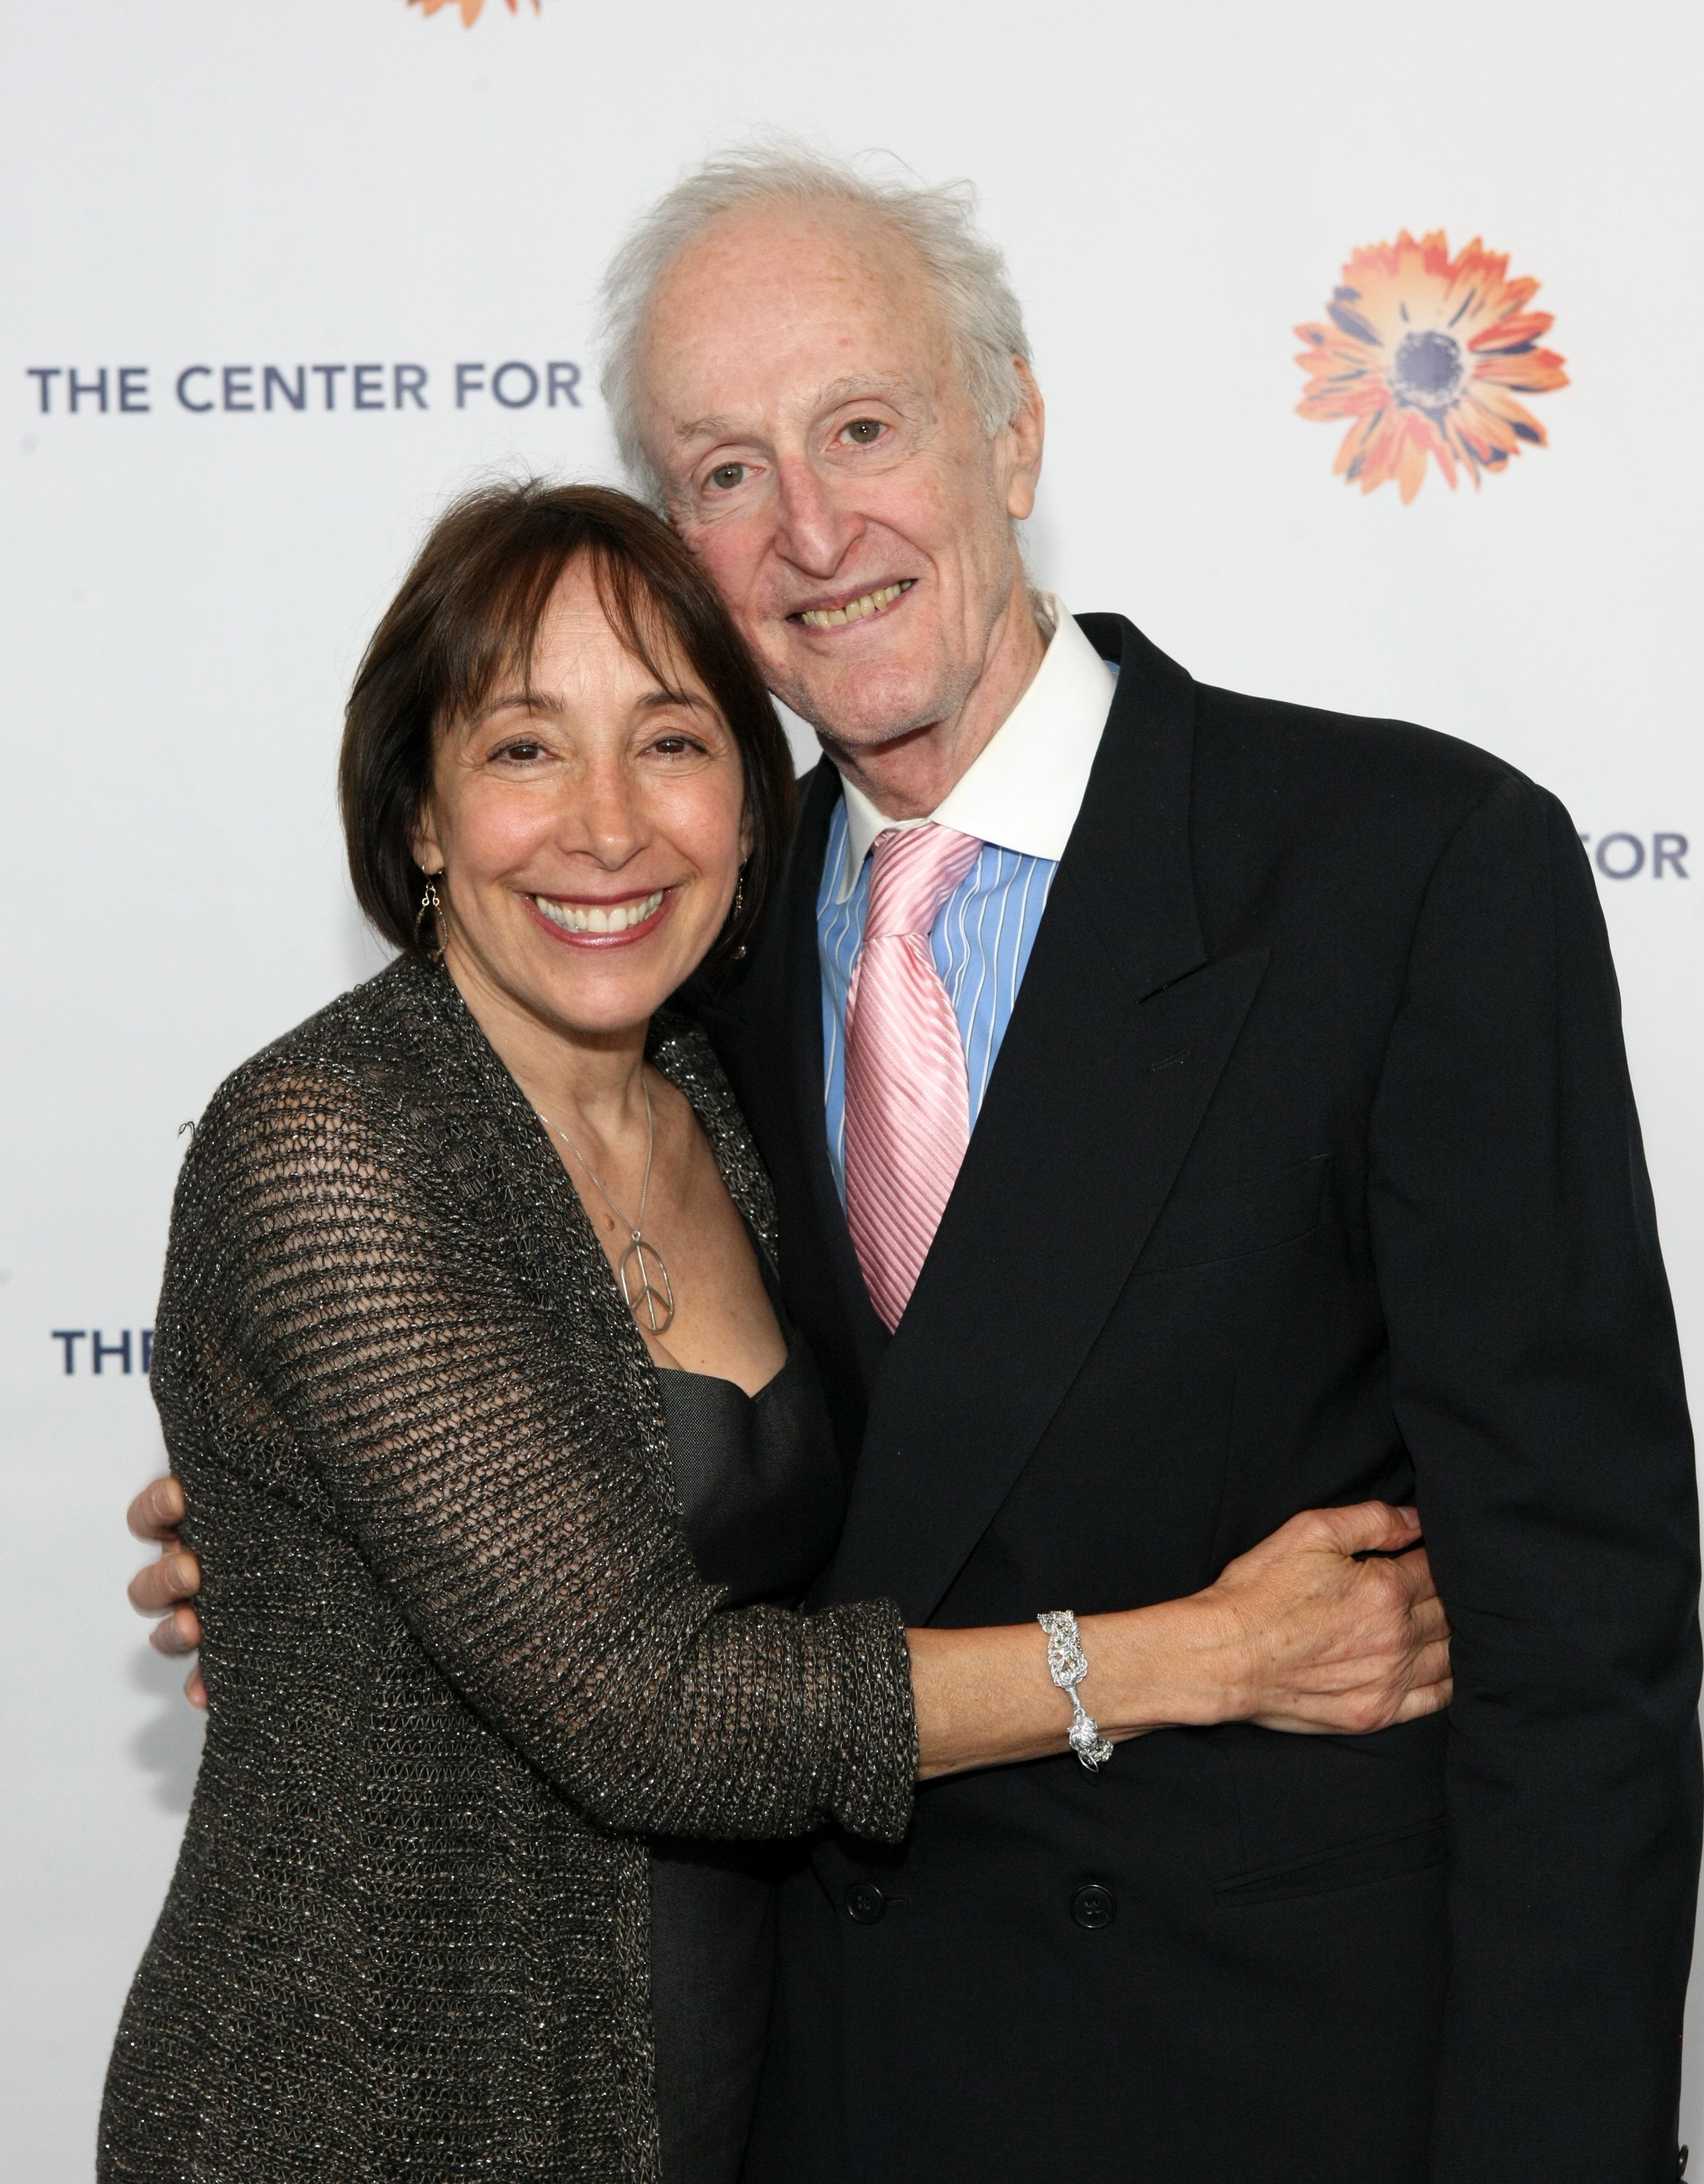 Didi Conn and her husband David Shire at the "Evening Of Discovery" Gala on May 15, 2012, in New York City | Source: Getty Images